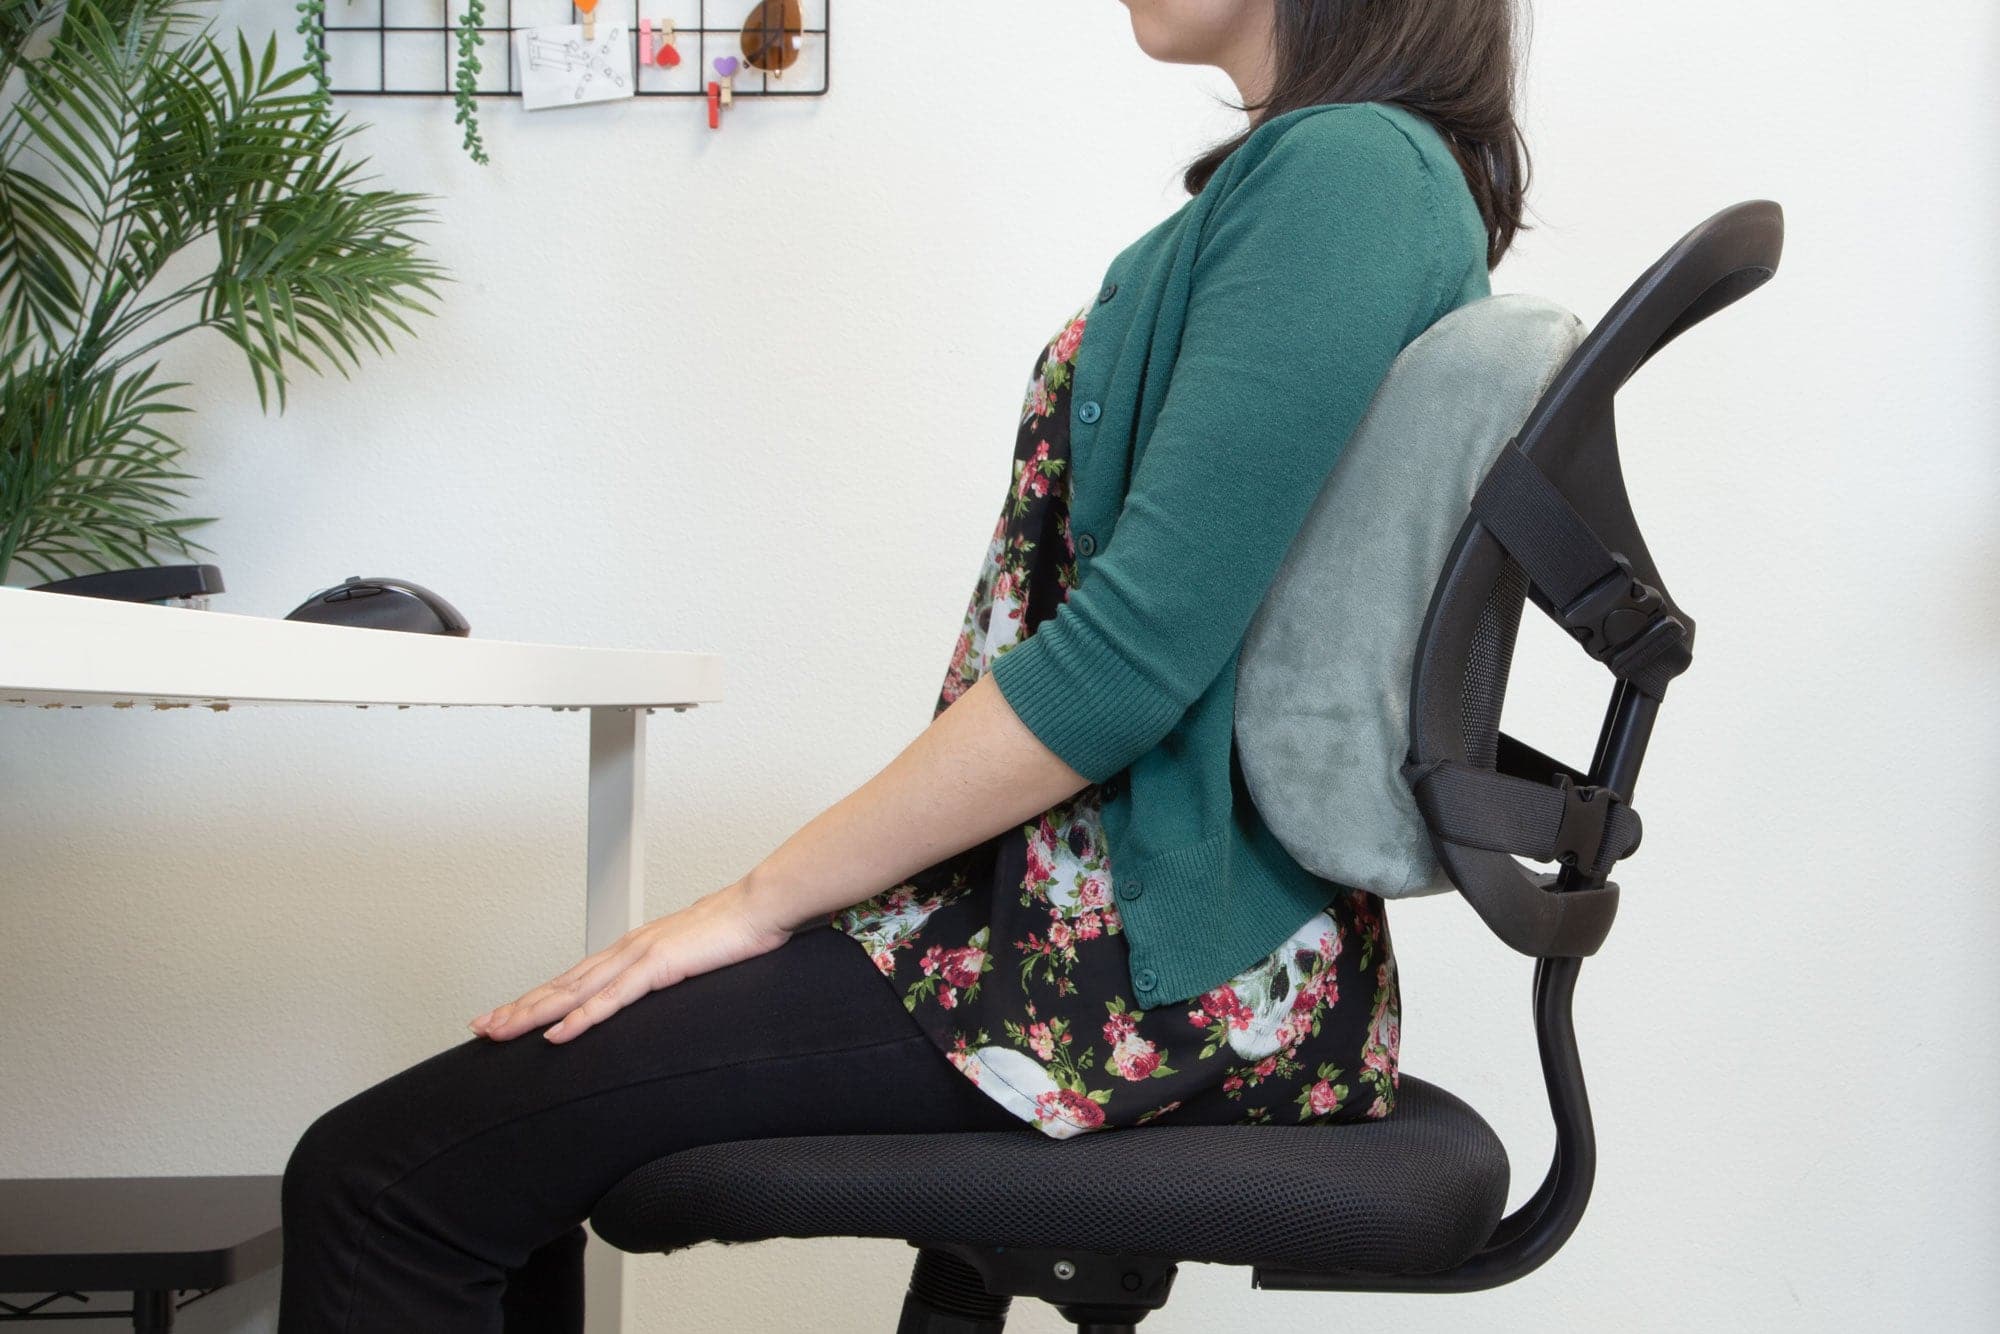 Lumbar support for sitting down 